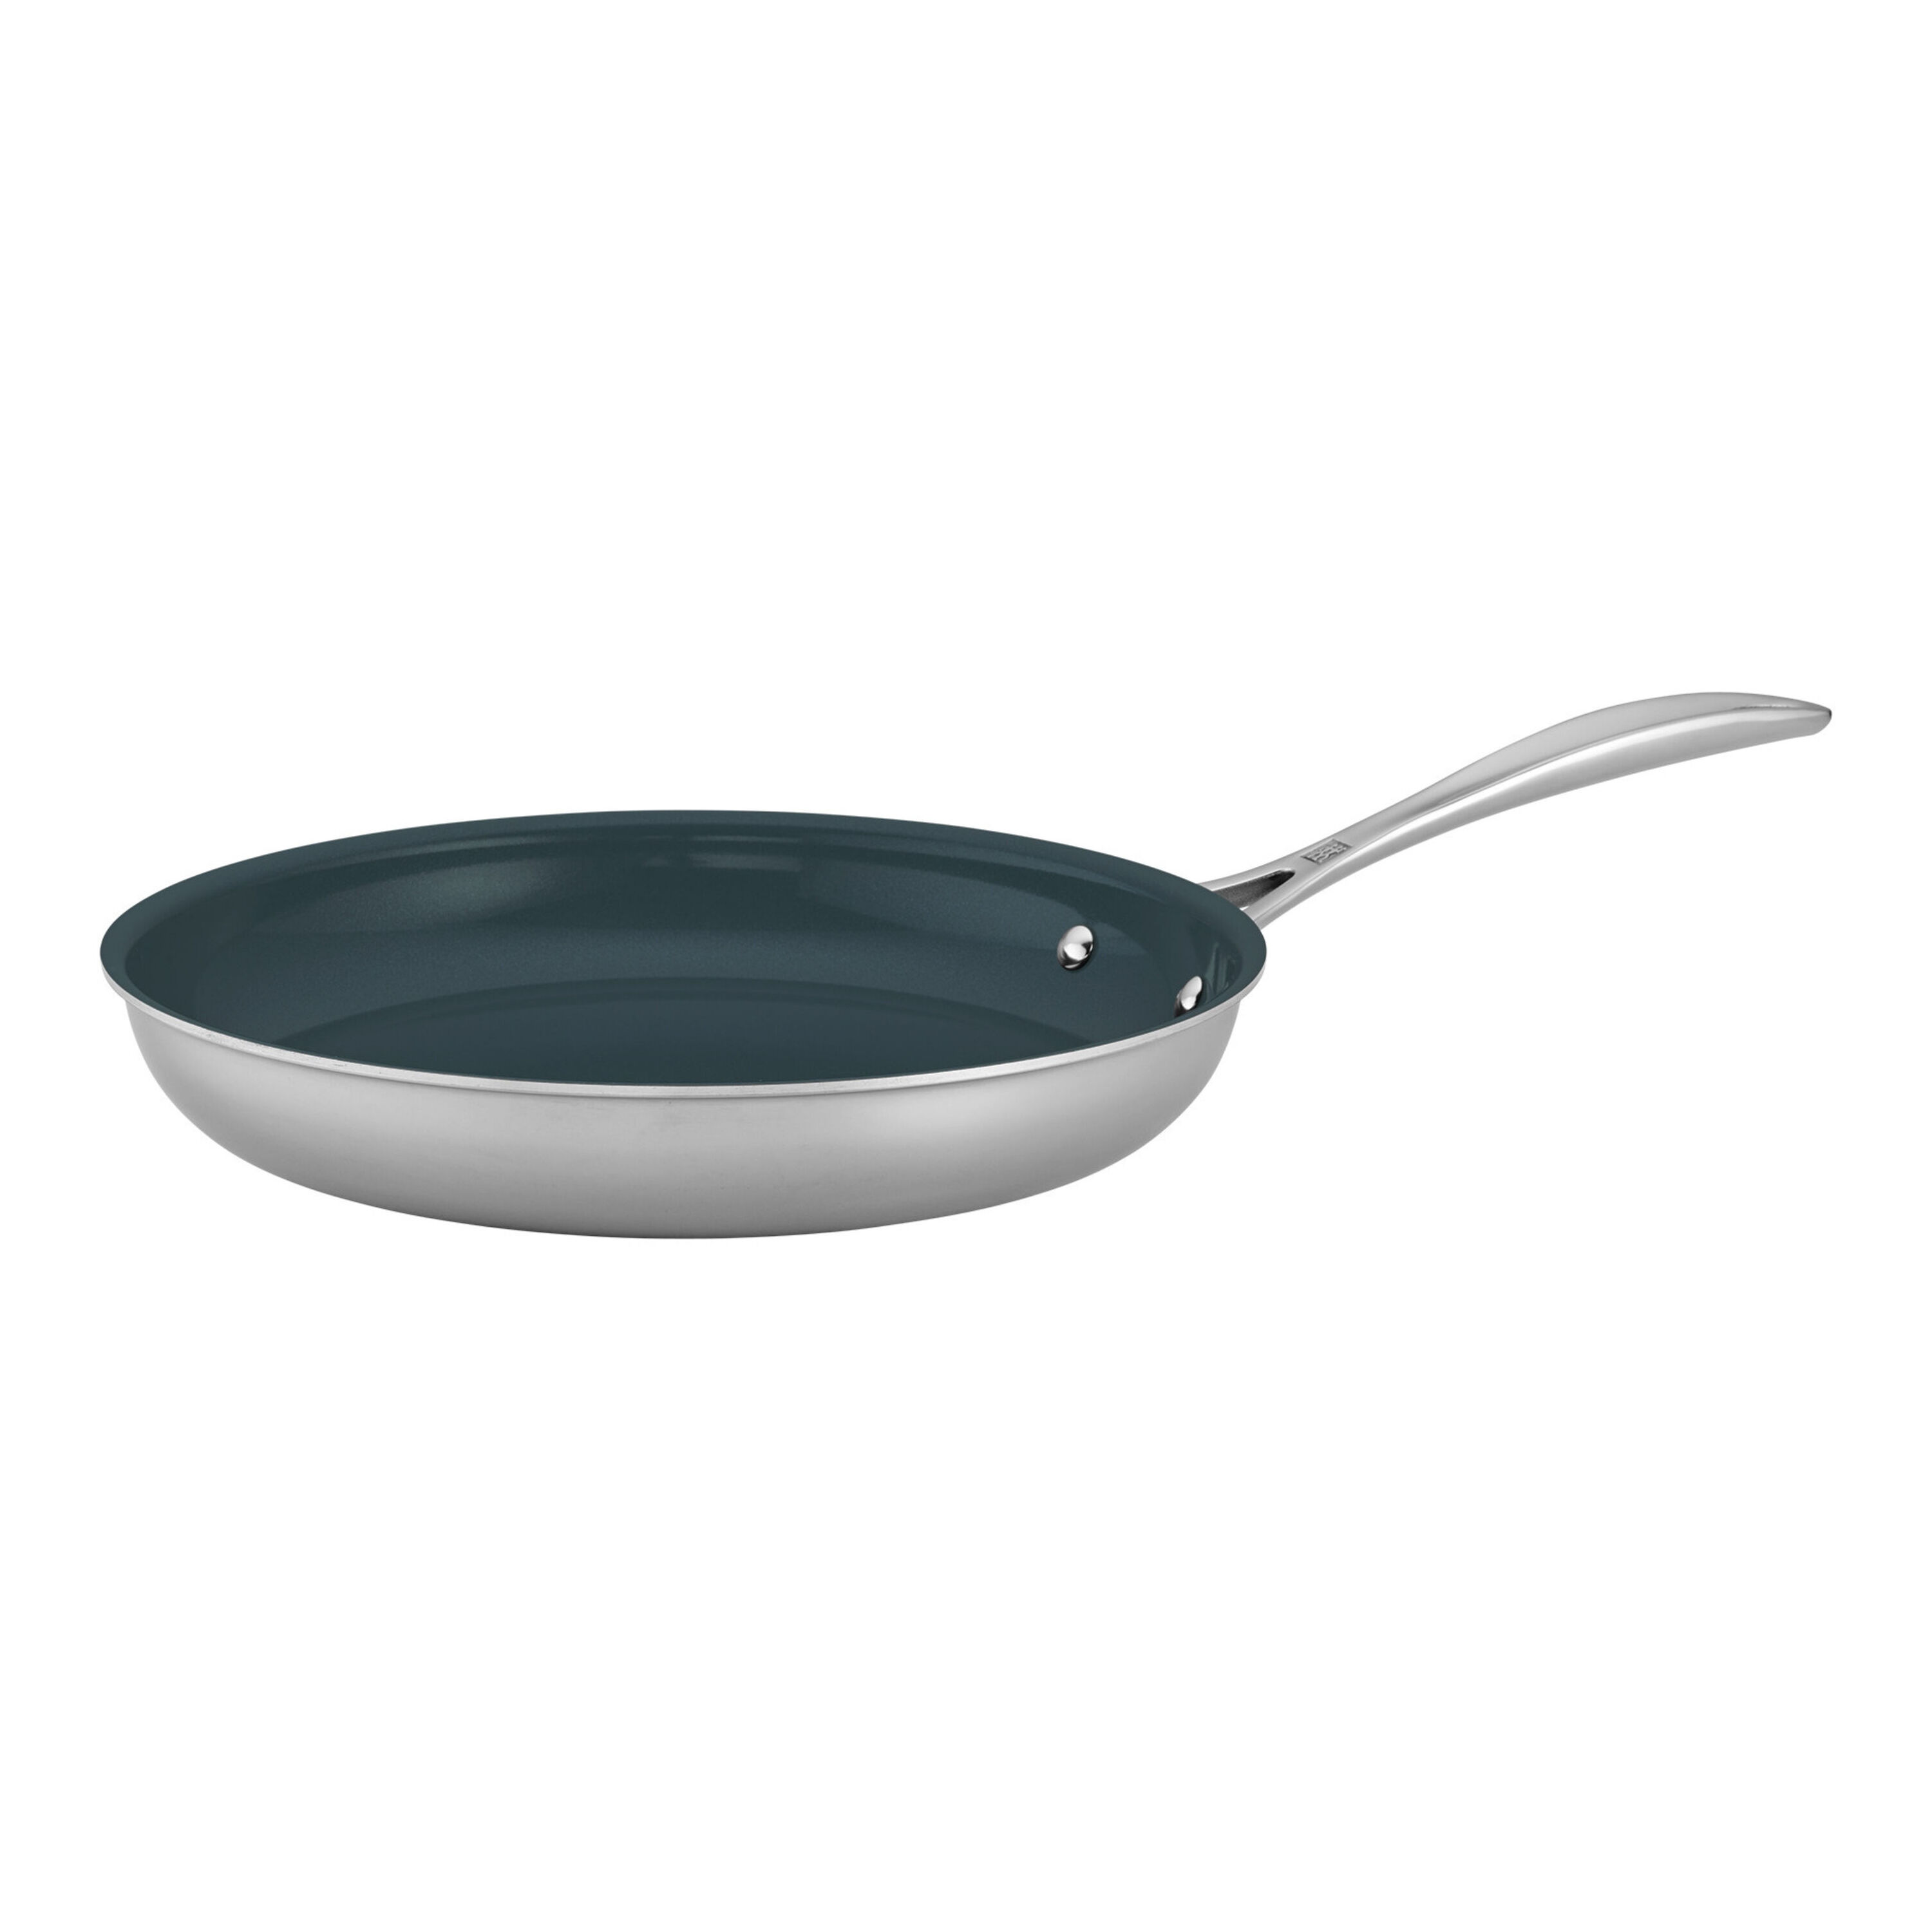 Nonstick Frying Pan Skillet with Silicone Lid 10 Inch Saute Pan